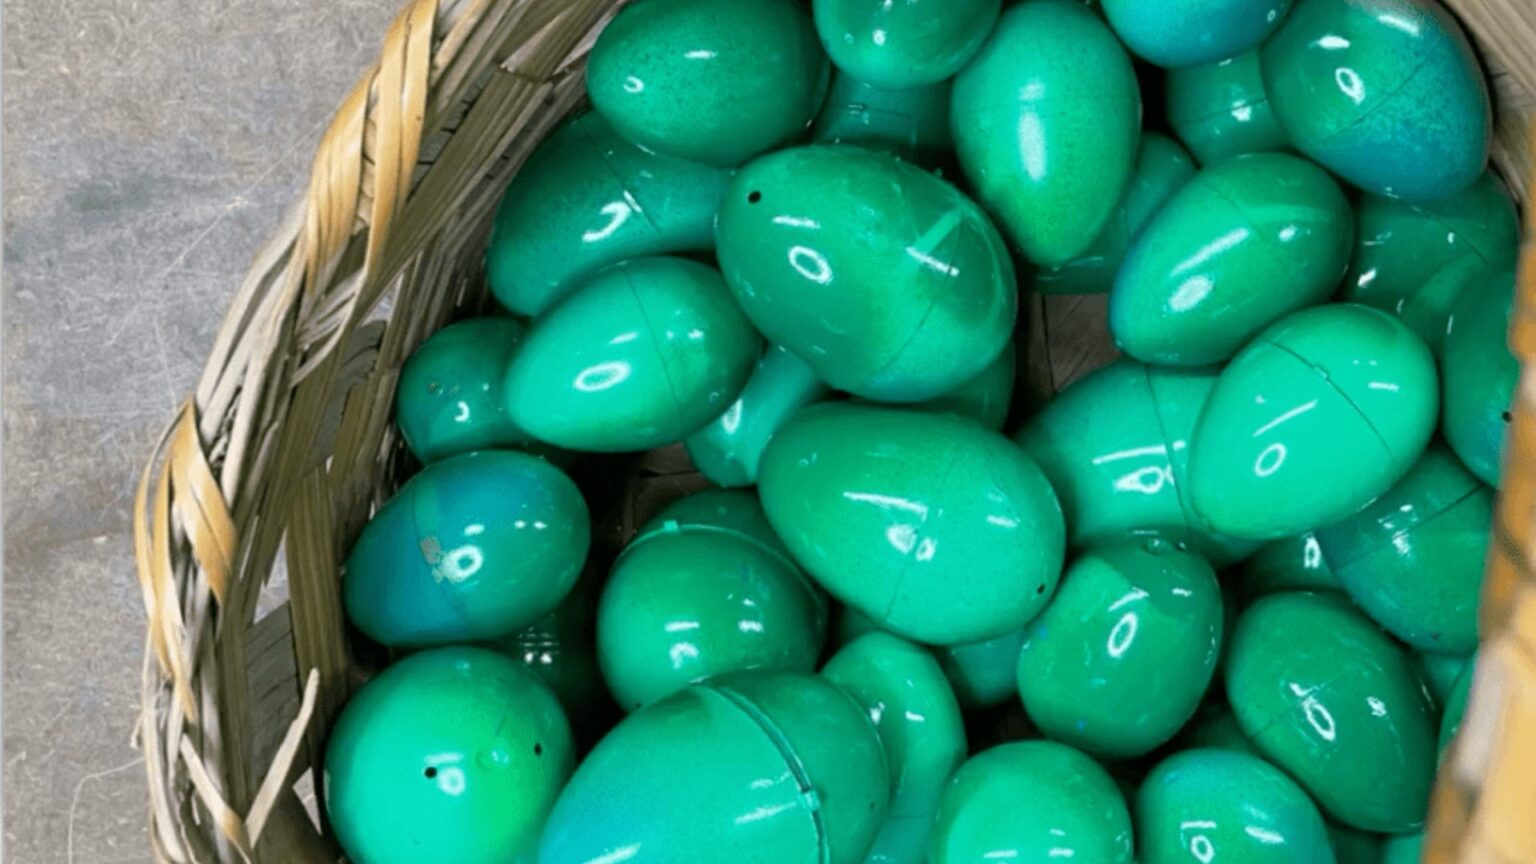 Basket of green and blue spray painted plastic Easter eggs